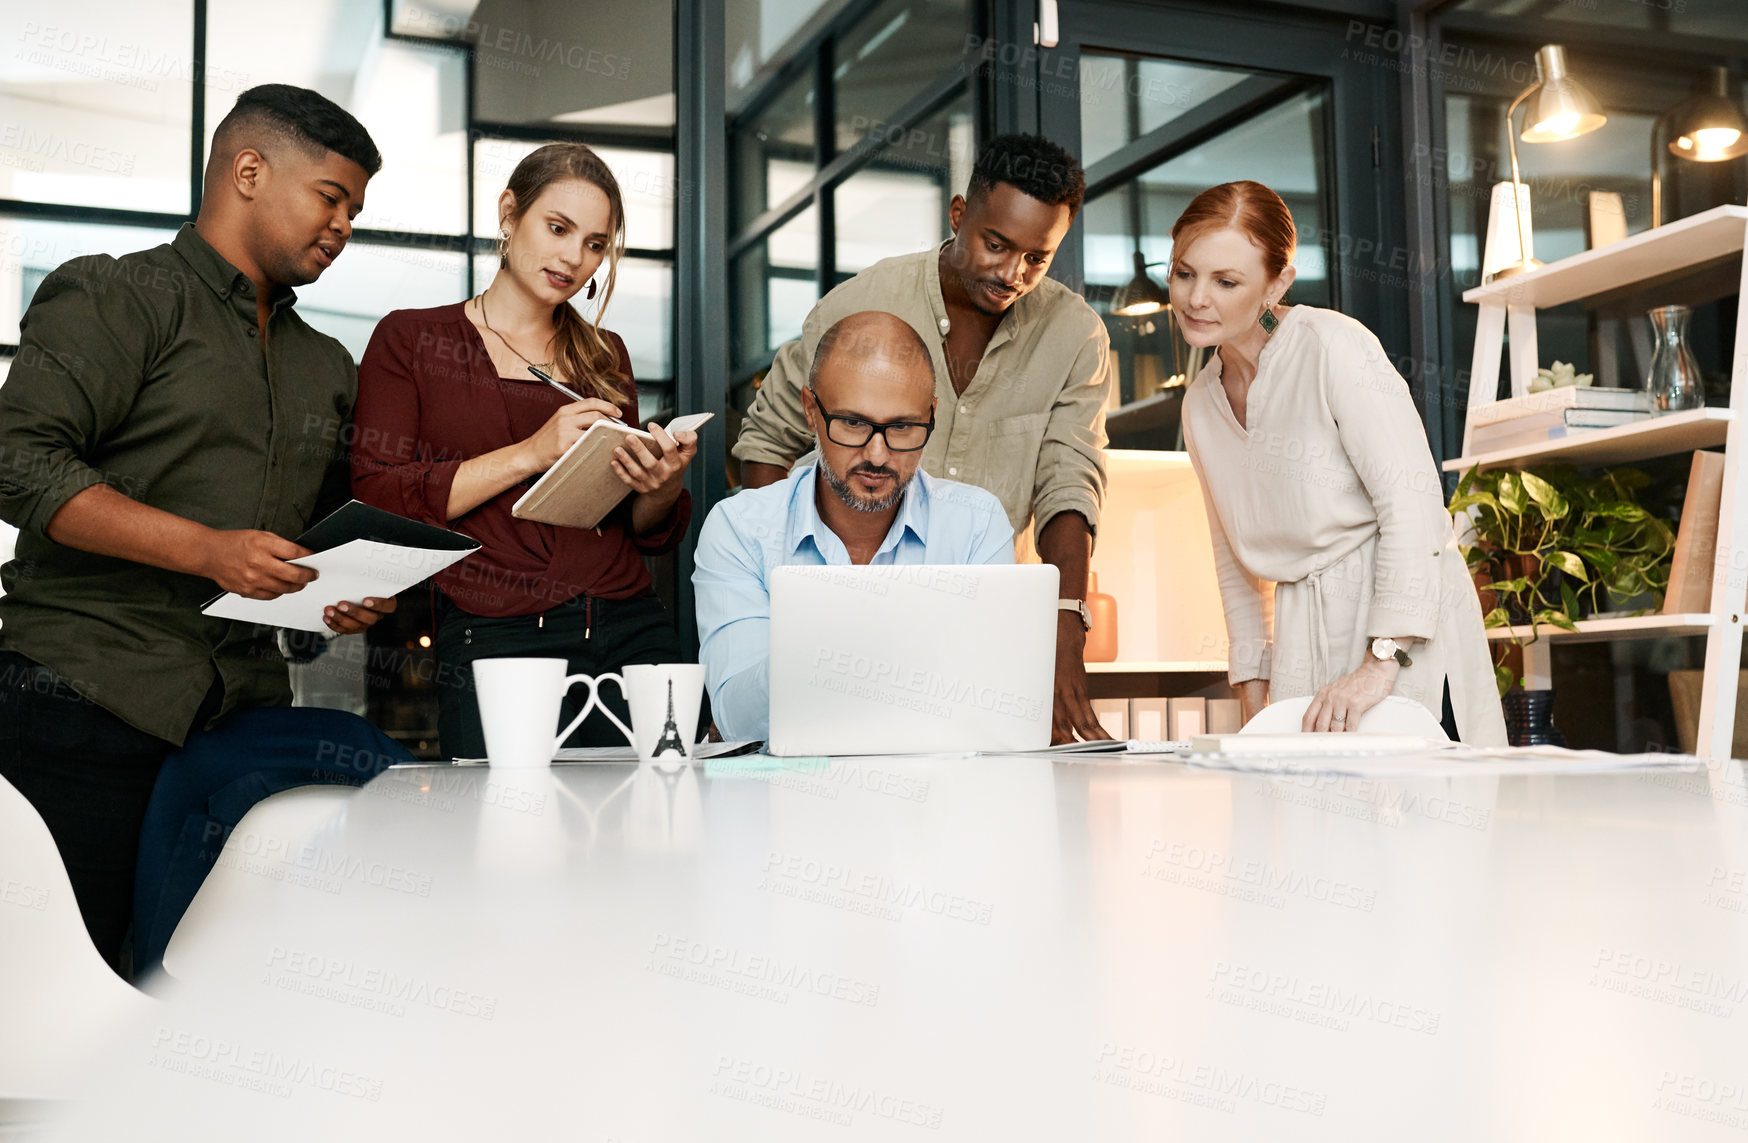 Buy stock photo Shot of a group of businesspeople using a laptop during a meeting in a modern office